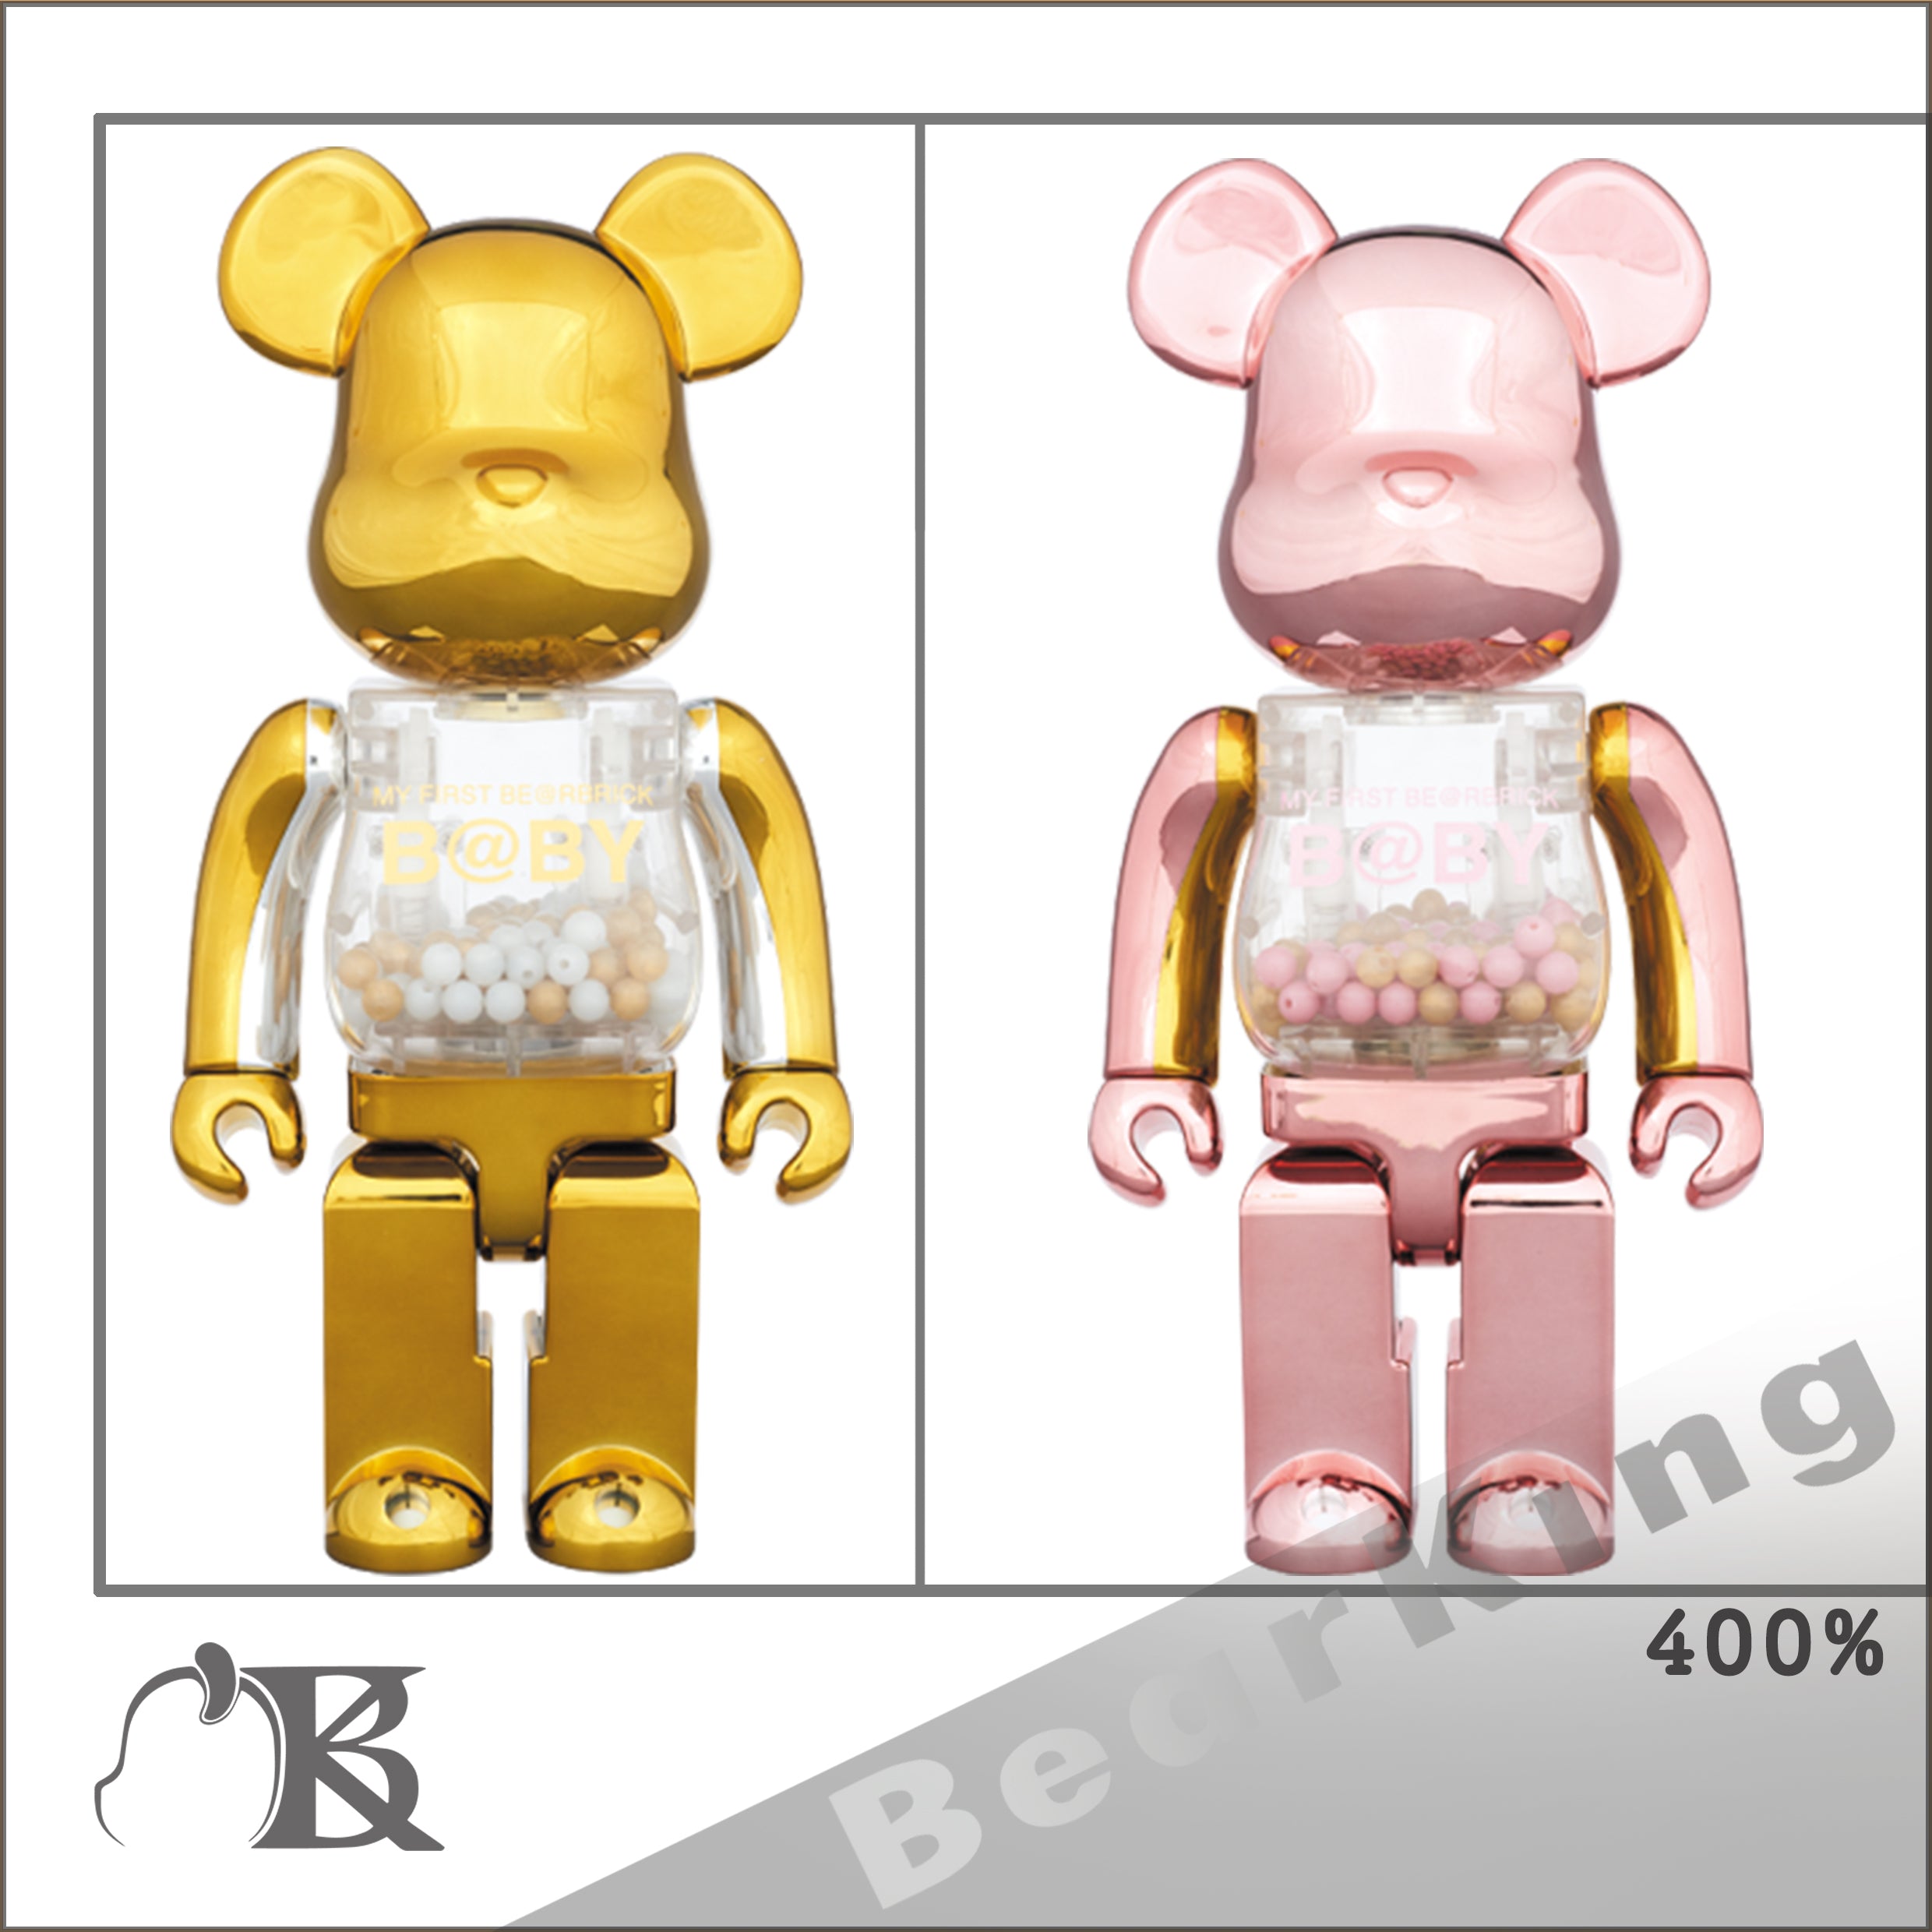 MY FIRST B@BY GOLD & SILVER Ver.／PINK & GOLD Ver. 400％ SET of 2 千秋 baby  金銀/玫瑰金